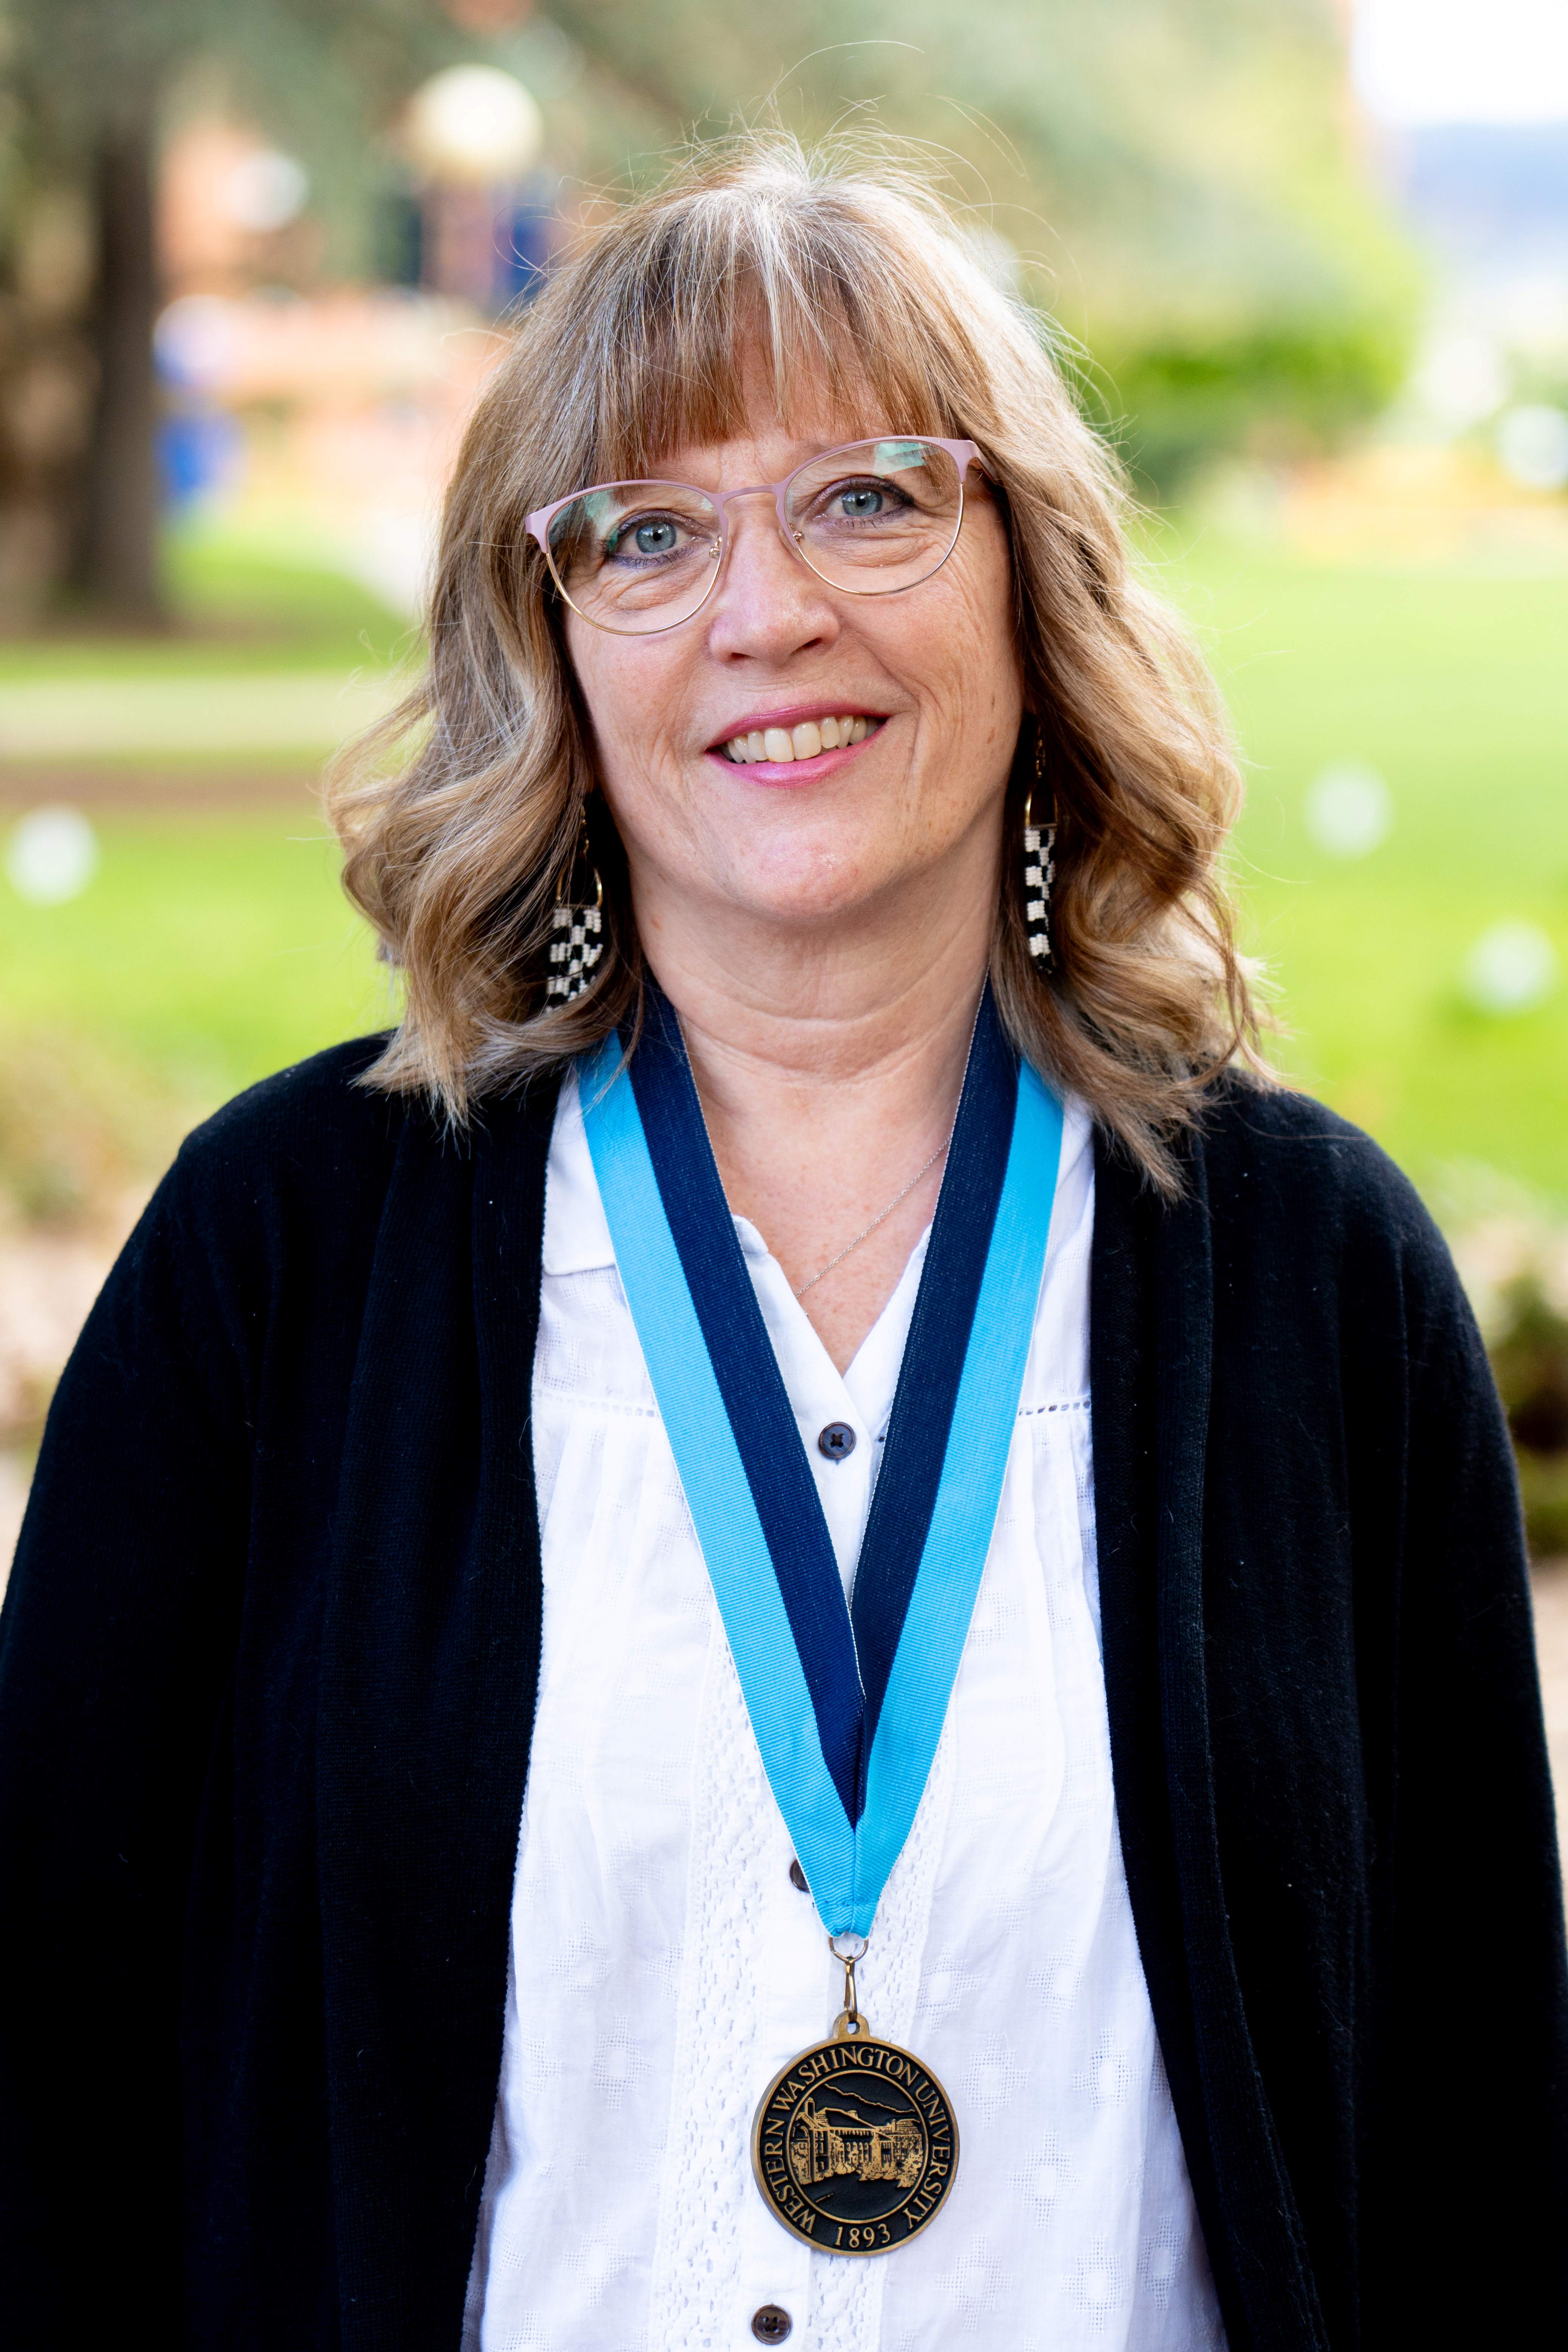 Diane Brearley stands on the Old Main Lawn wearing the WWU award medallion